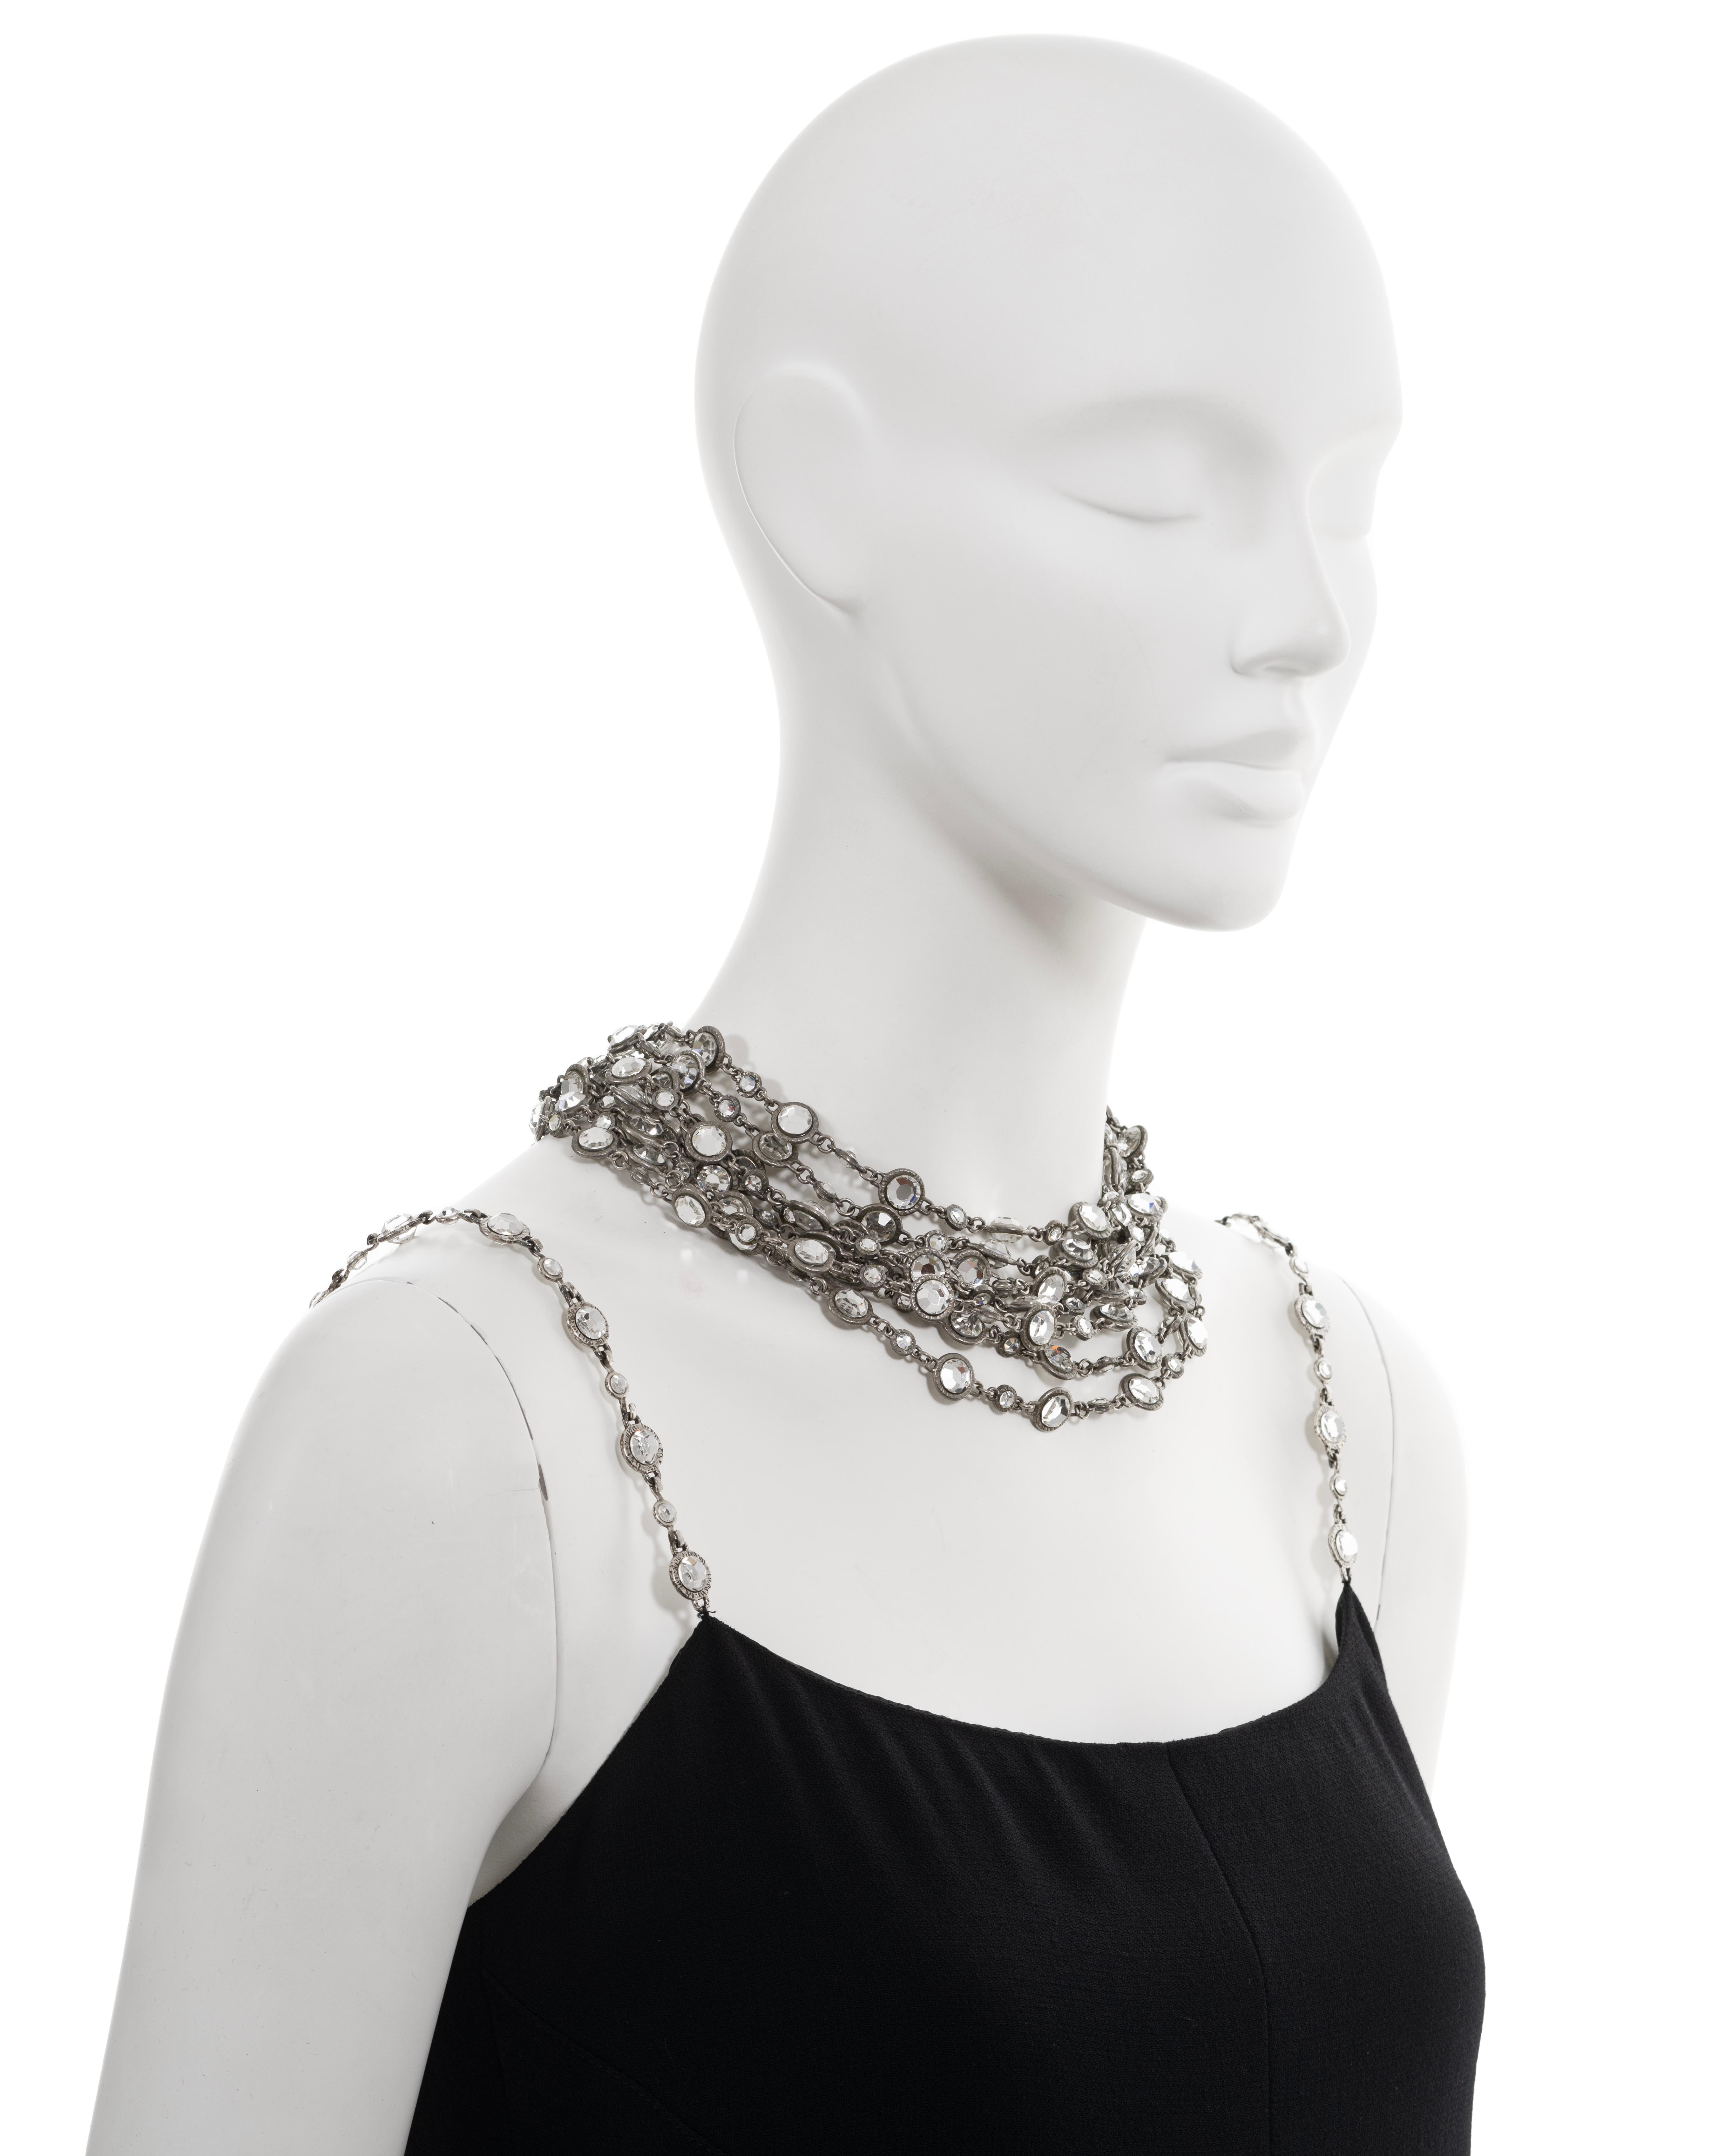 Chanel by Karl Lagerfeld black evening dress with crystal jewellery set, ss 1998 For Sale 7